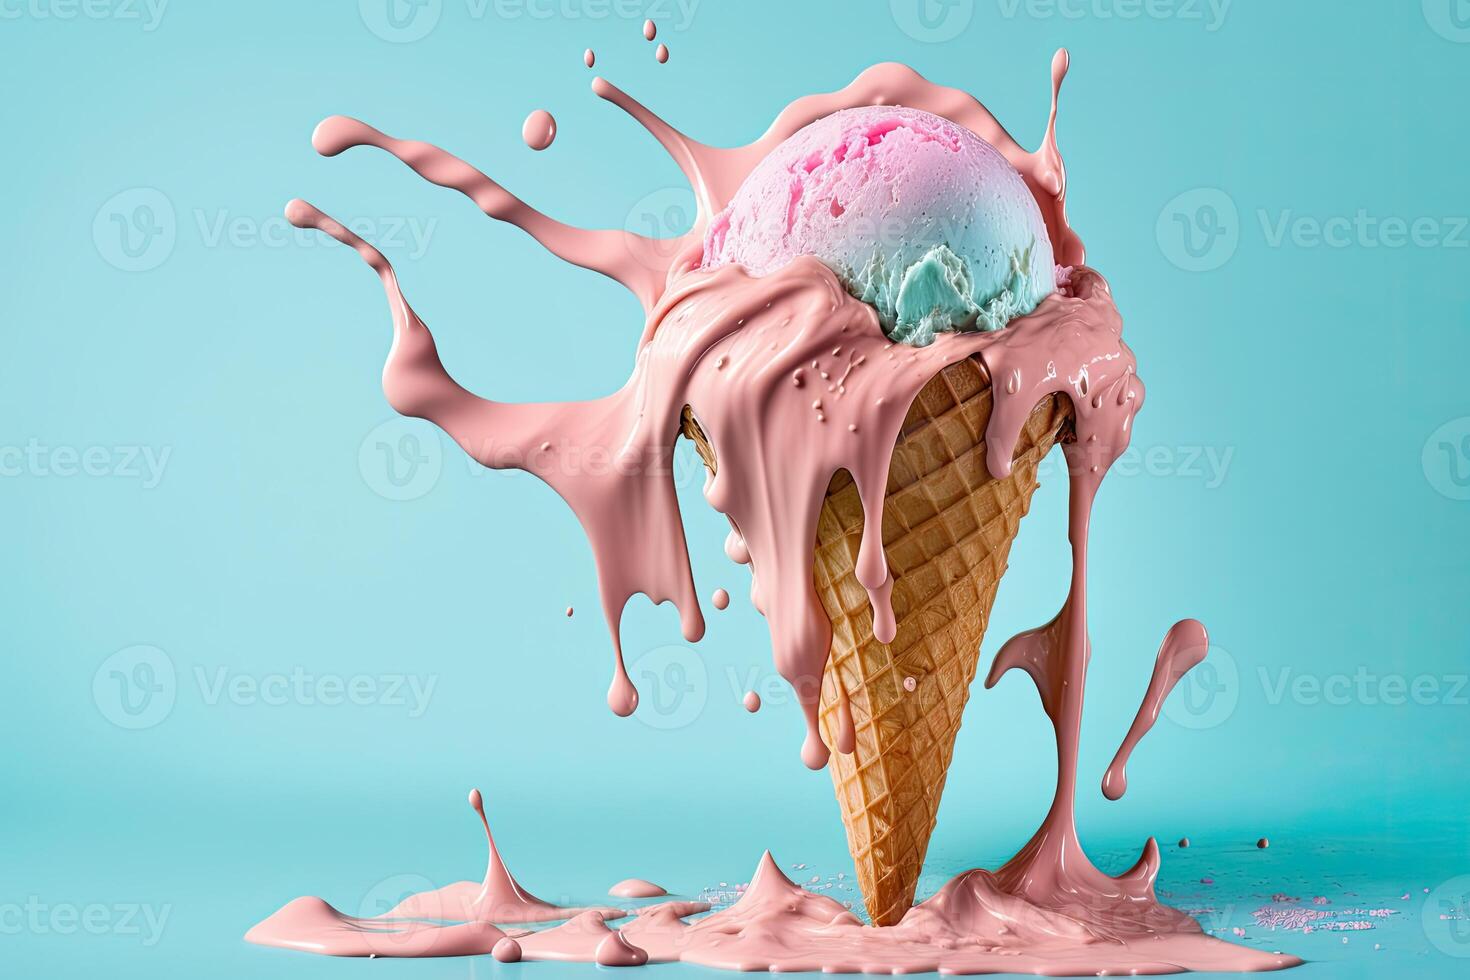 Pink ice cream melting and spilling from the waffle cone. Illustration photo